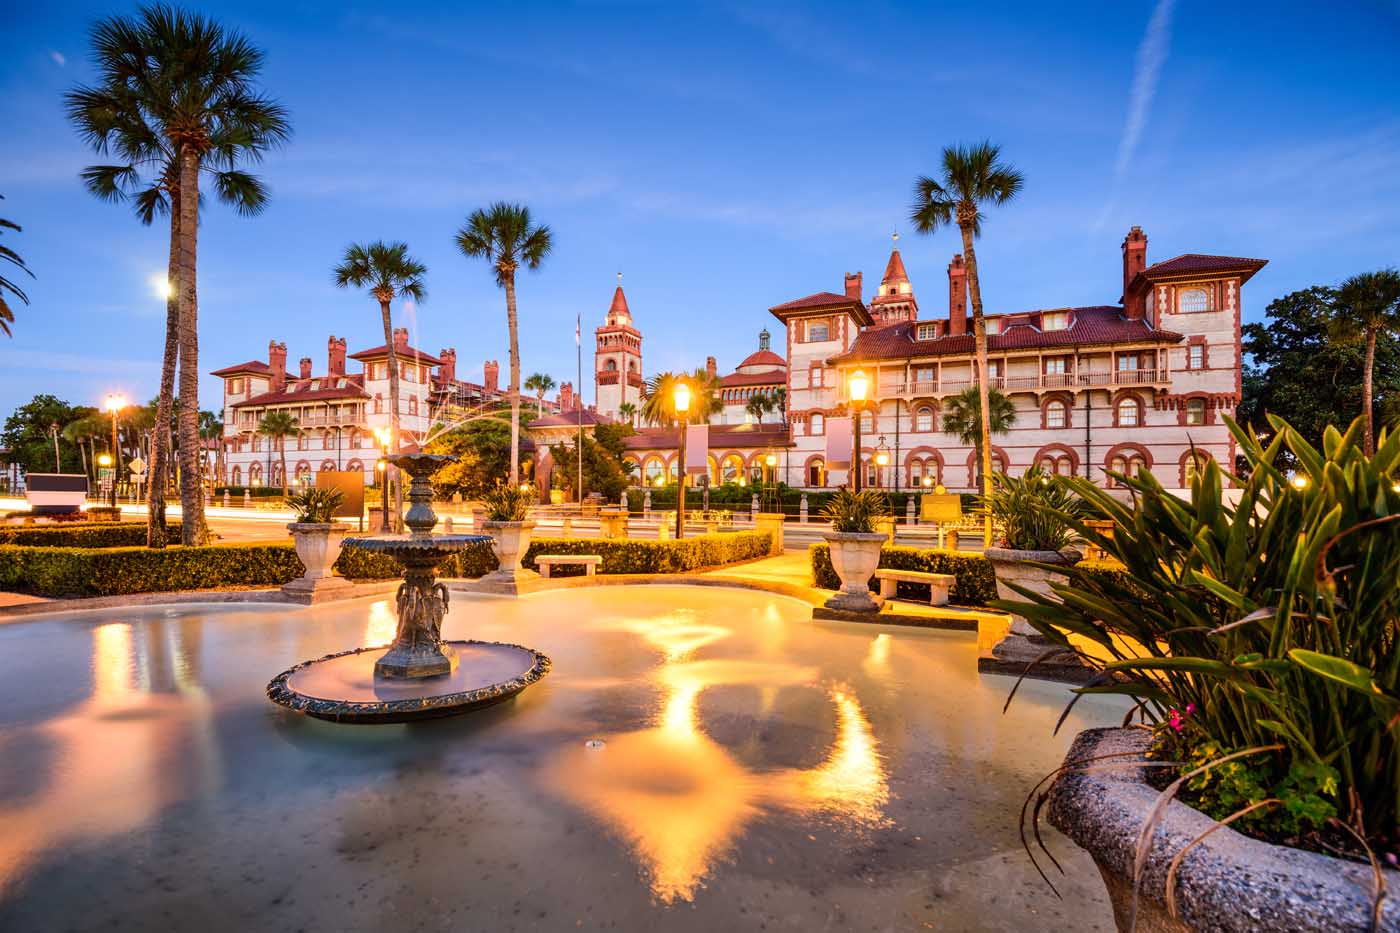 Saint Augustine Travel Cost - Average Price of a Vacation ...